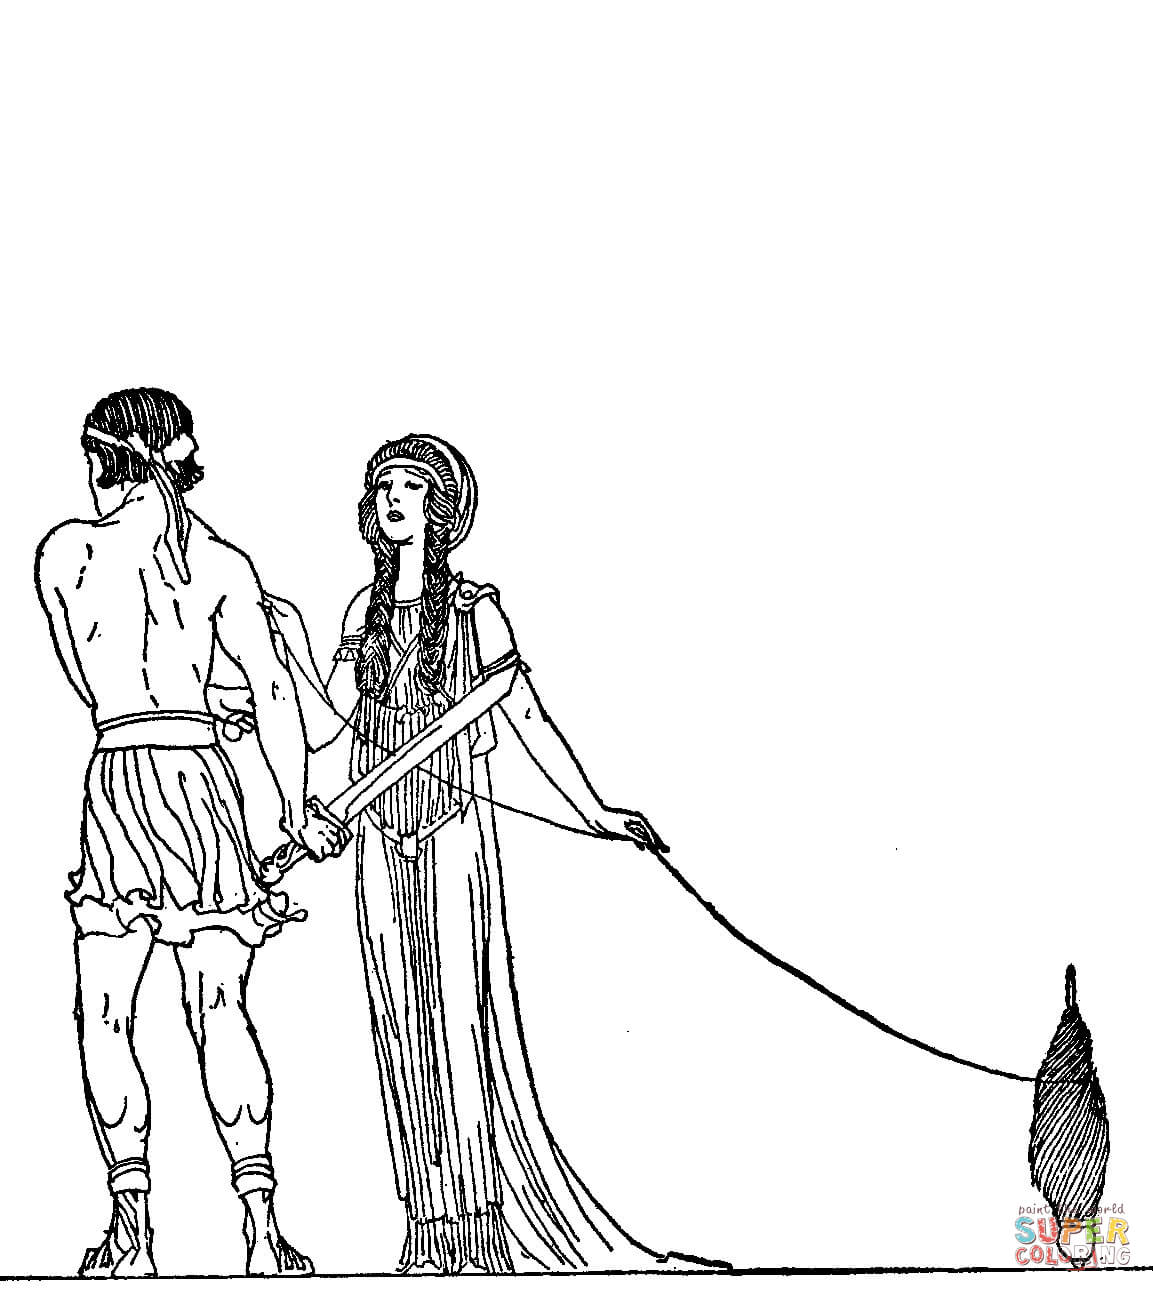 Greek Mythology coloring pages | Free Coloring Pages